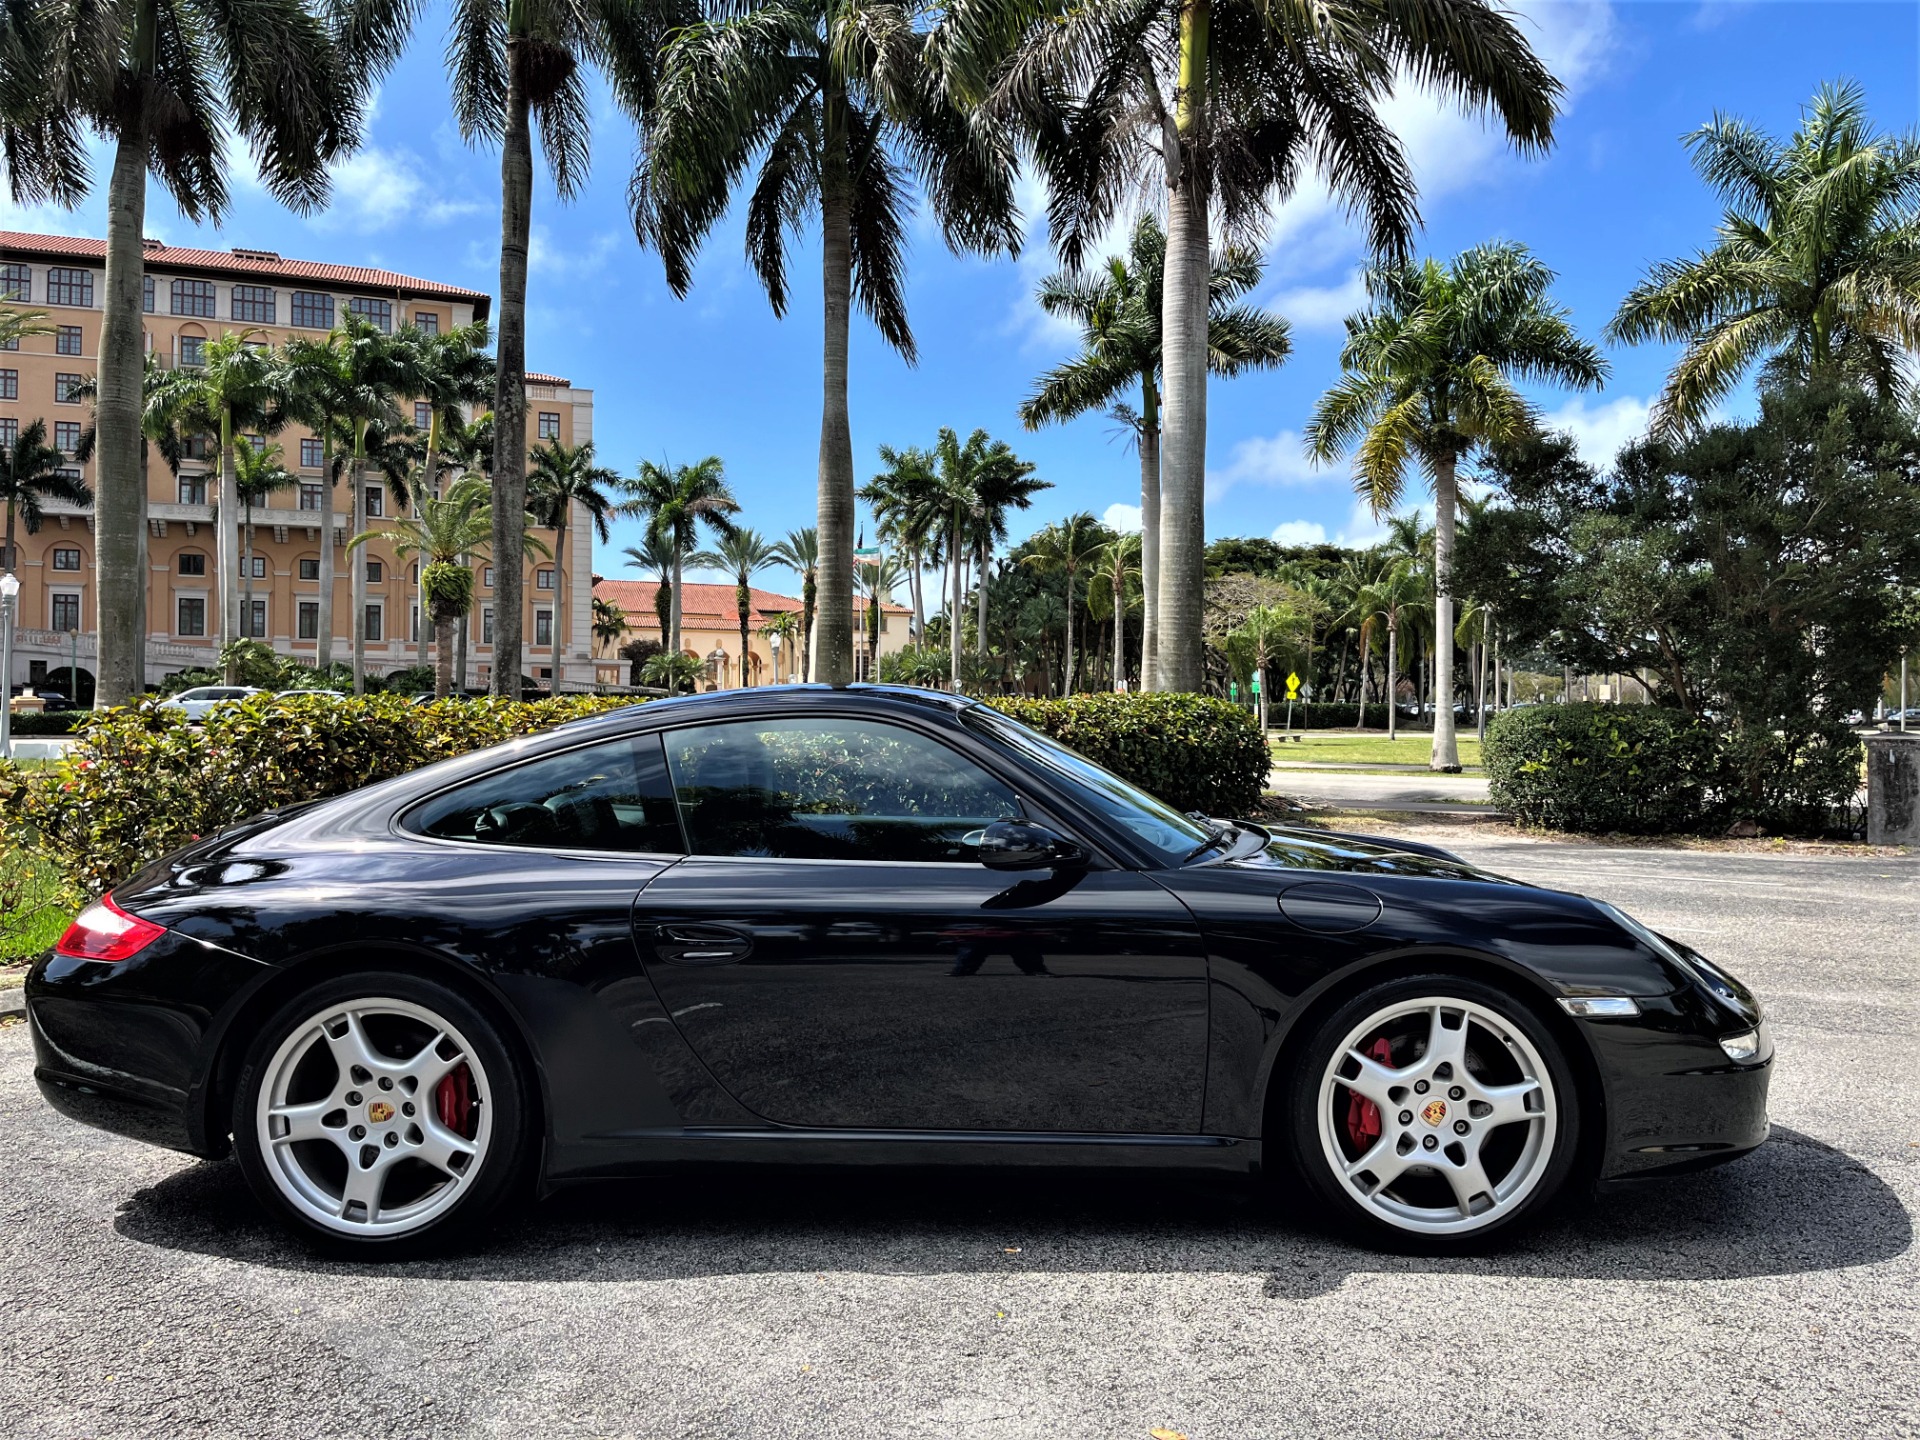 Used 2005 Porsche 911 Carrera S for sale Sold at The Gables Sports Cars in Miami FL 33146 3